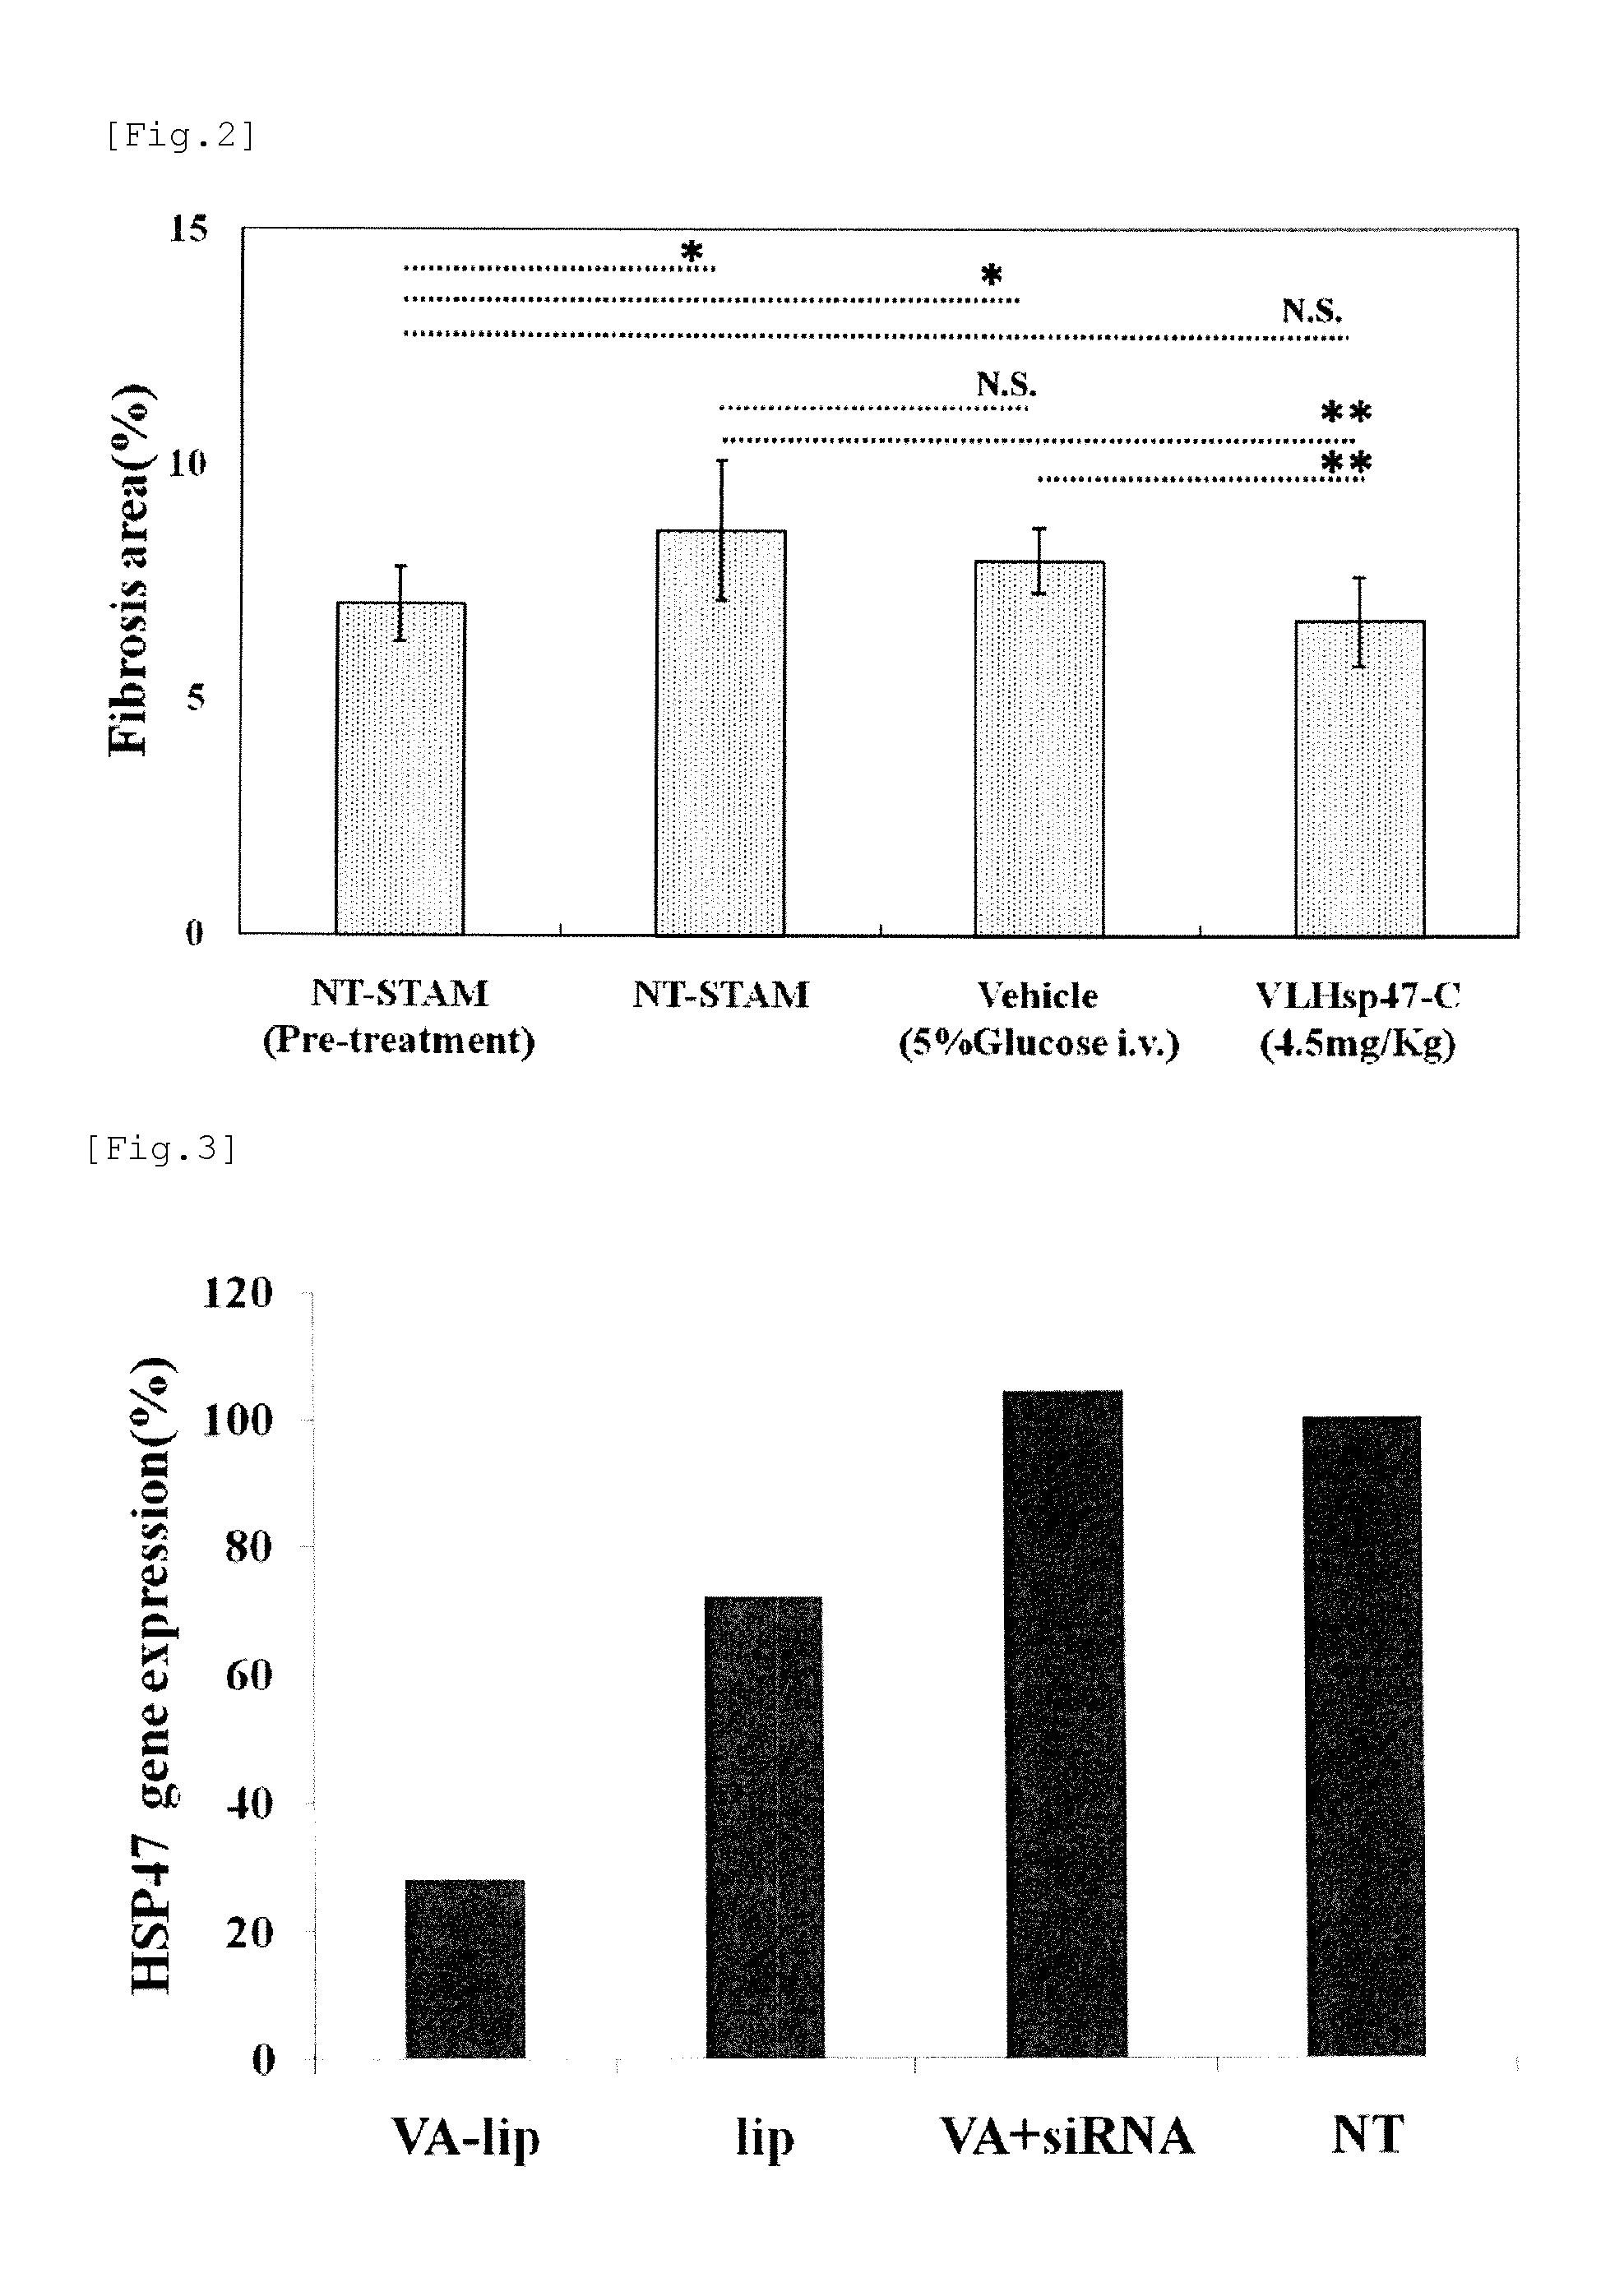 Agent for treating renal fibrosis